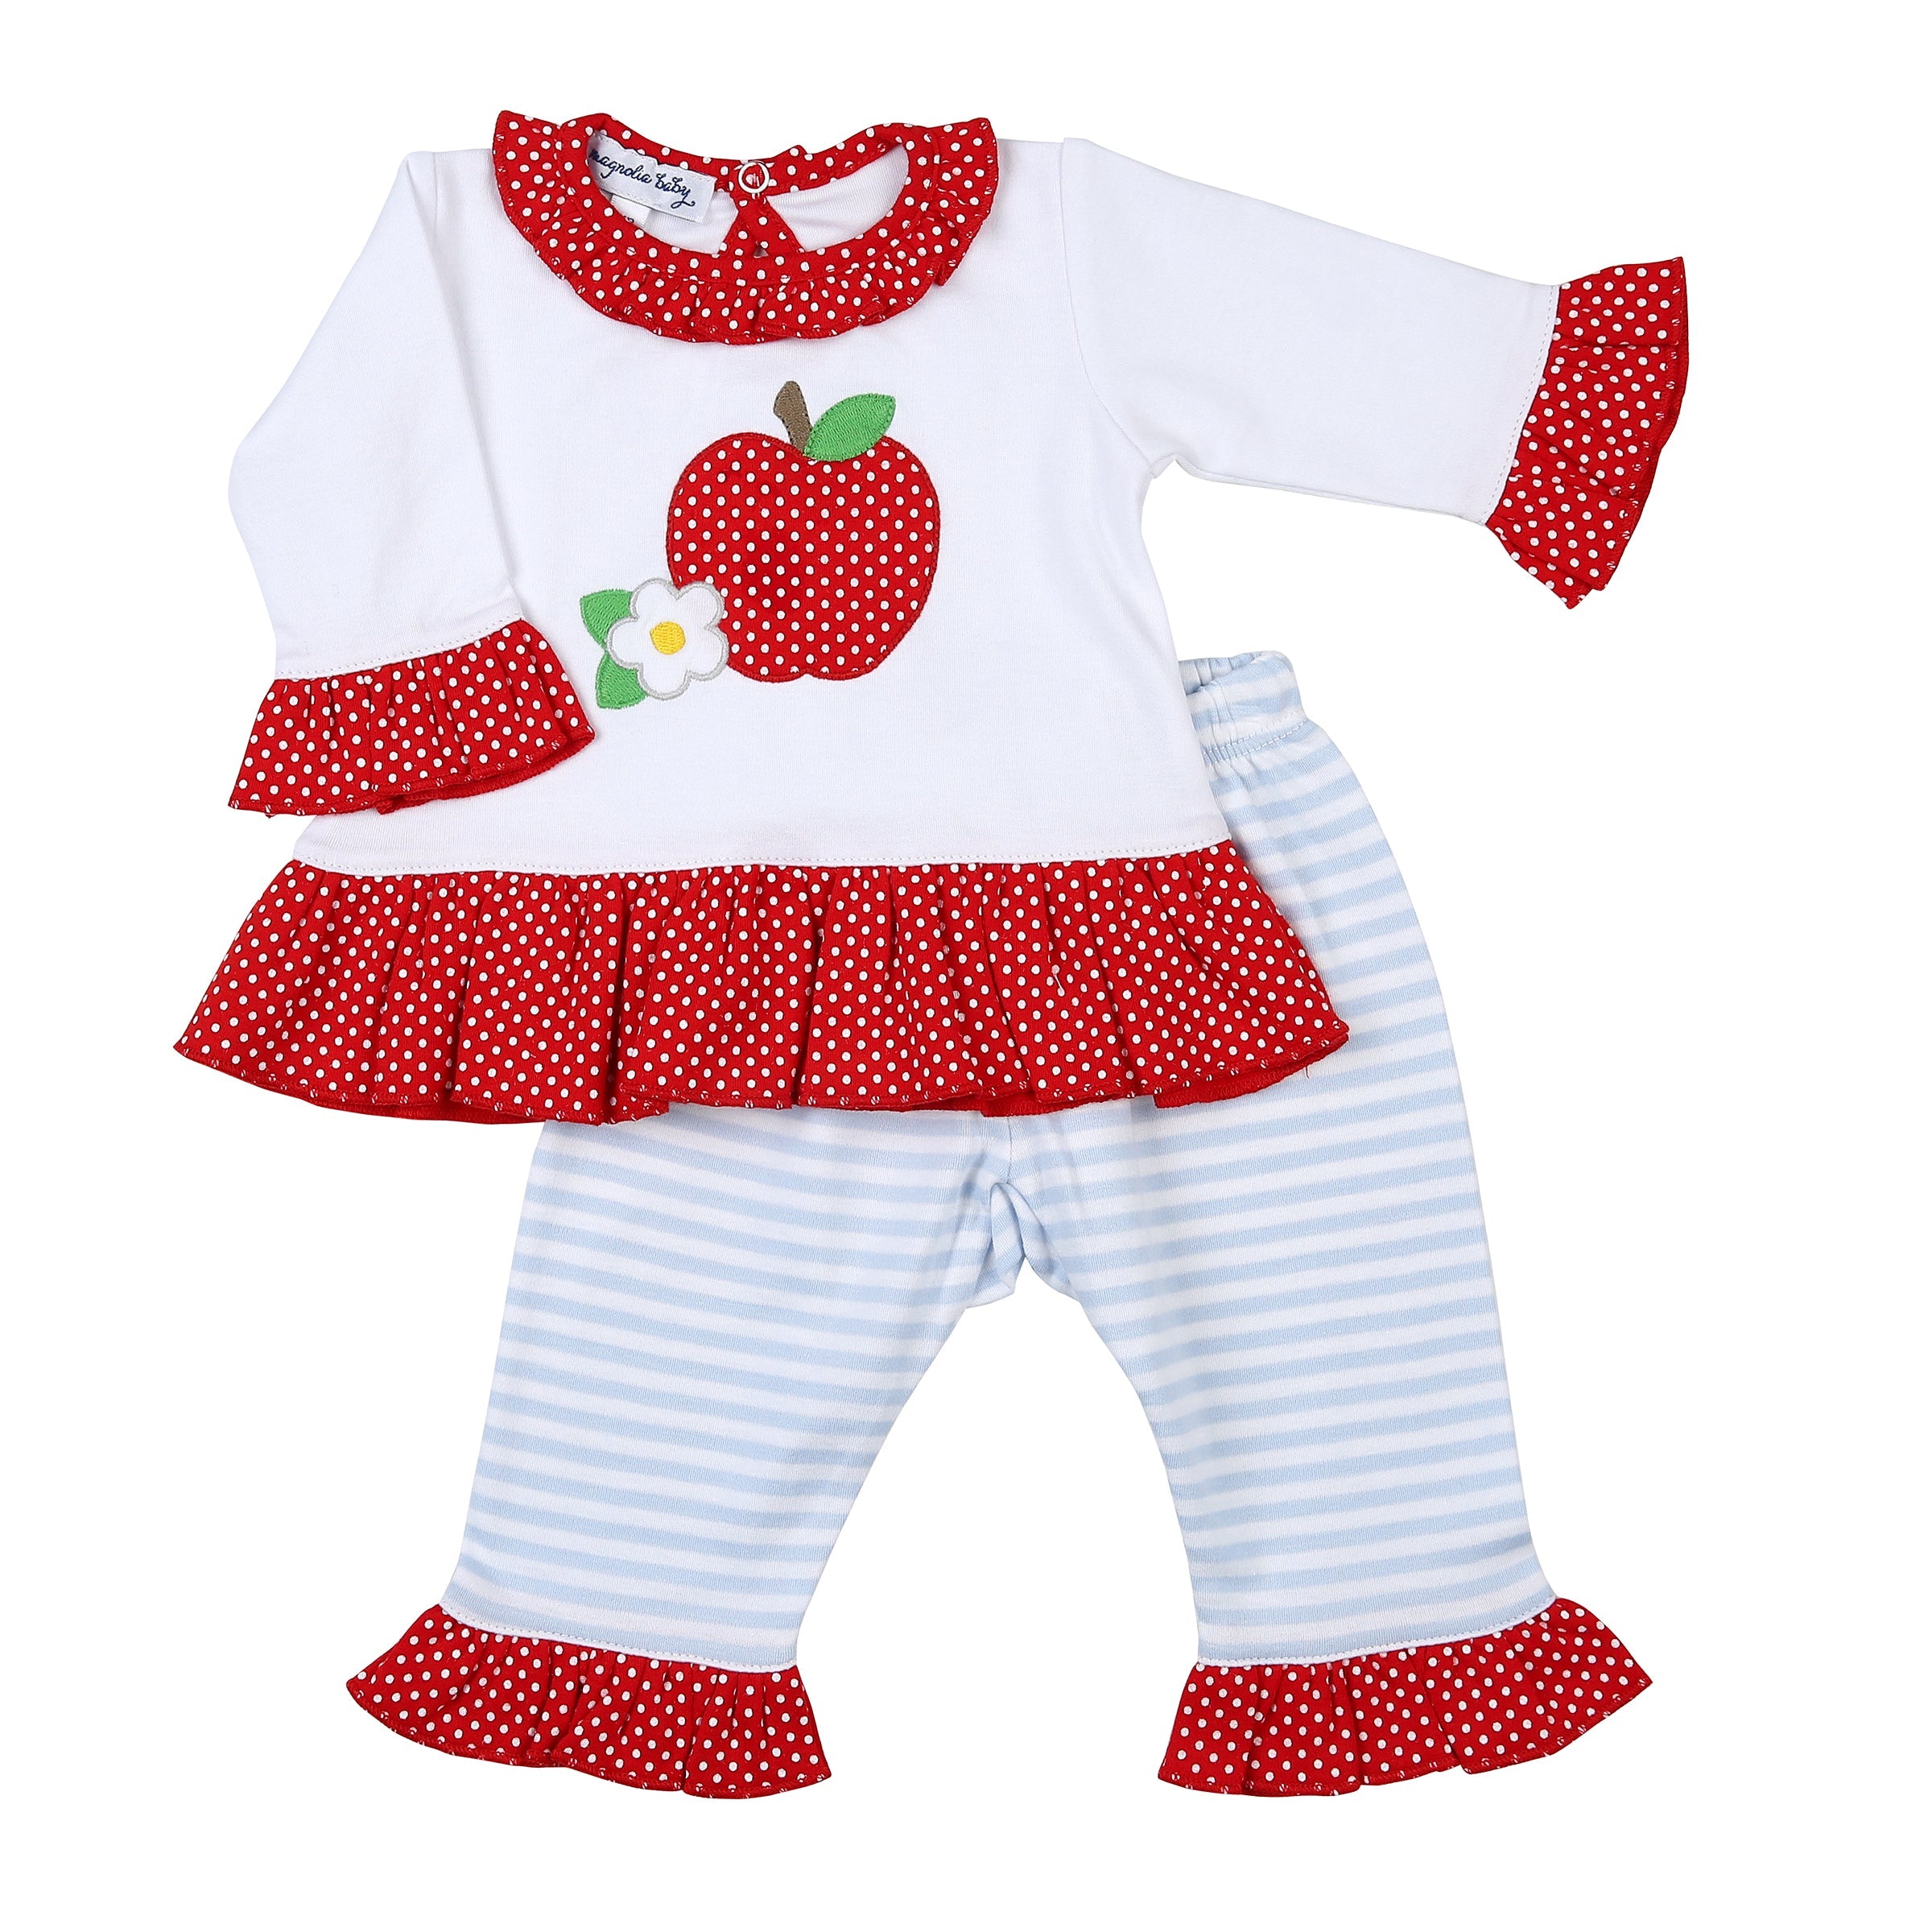 Magnolia Baby Red Apple Applique Ruffle Toddler 2pc Pant Set